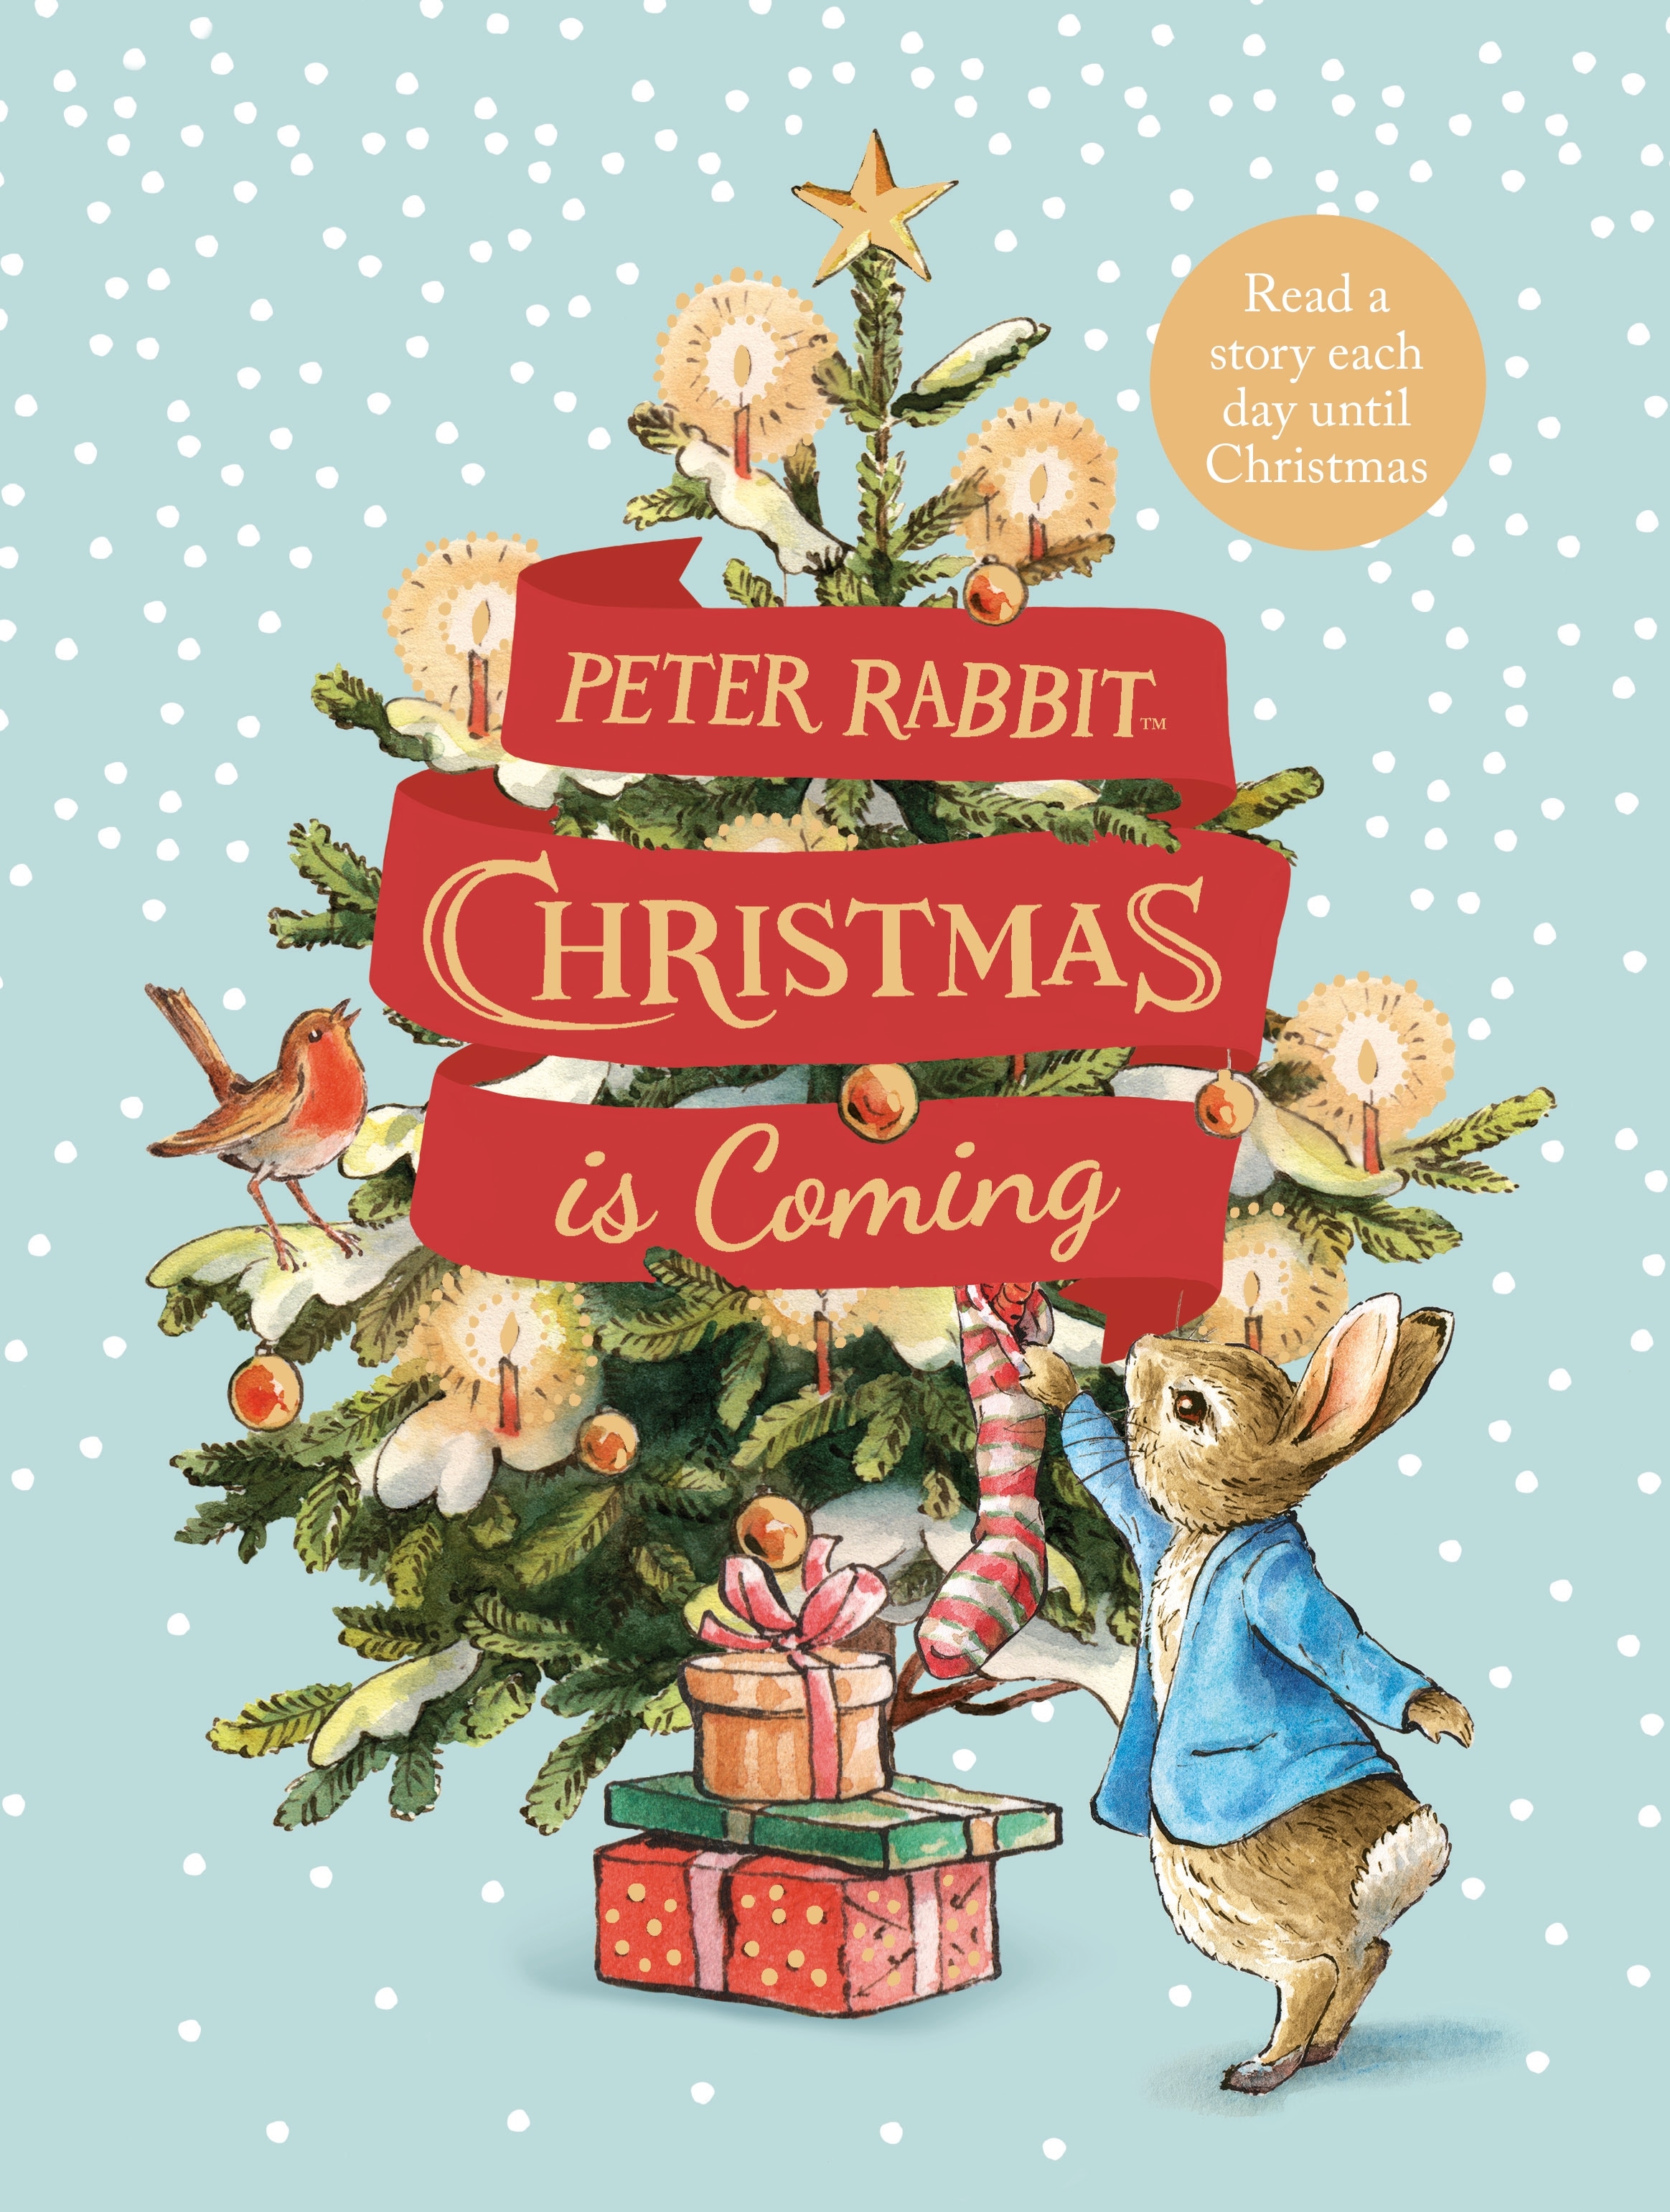 Book “Peter Rabbit: Christmas is Coming” by Beatrix Potter — October 22, 2020